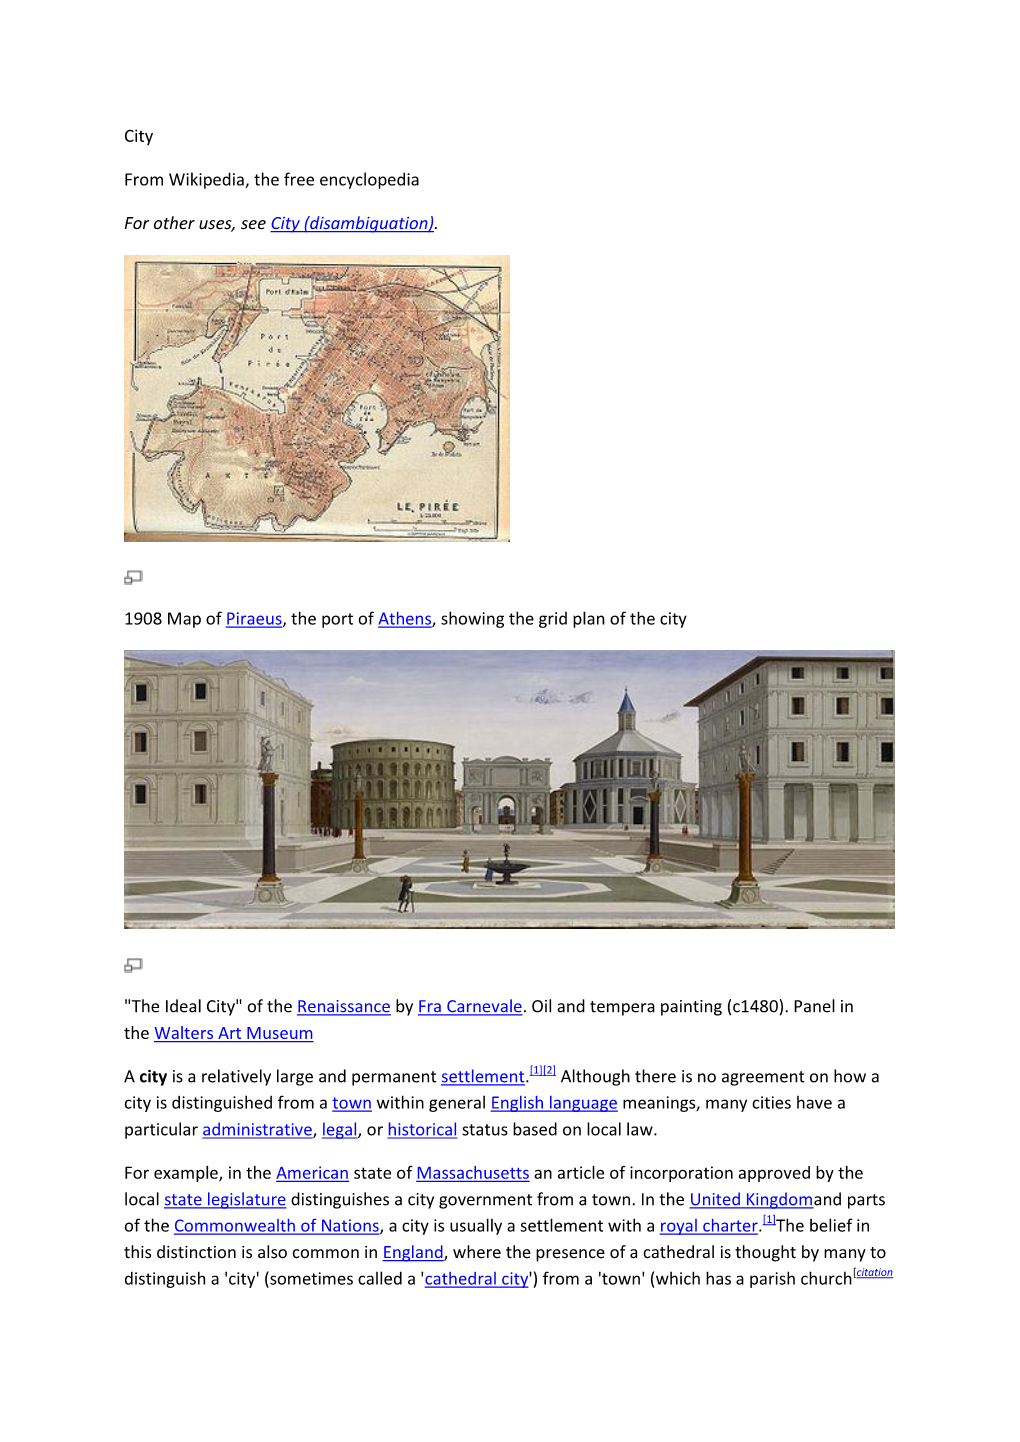 City from Wikipedia, the Free Encyclopedia for Other Uses, See City